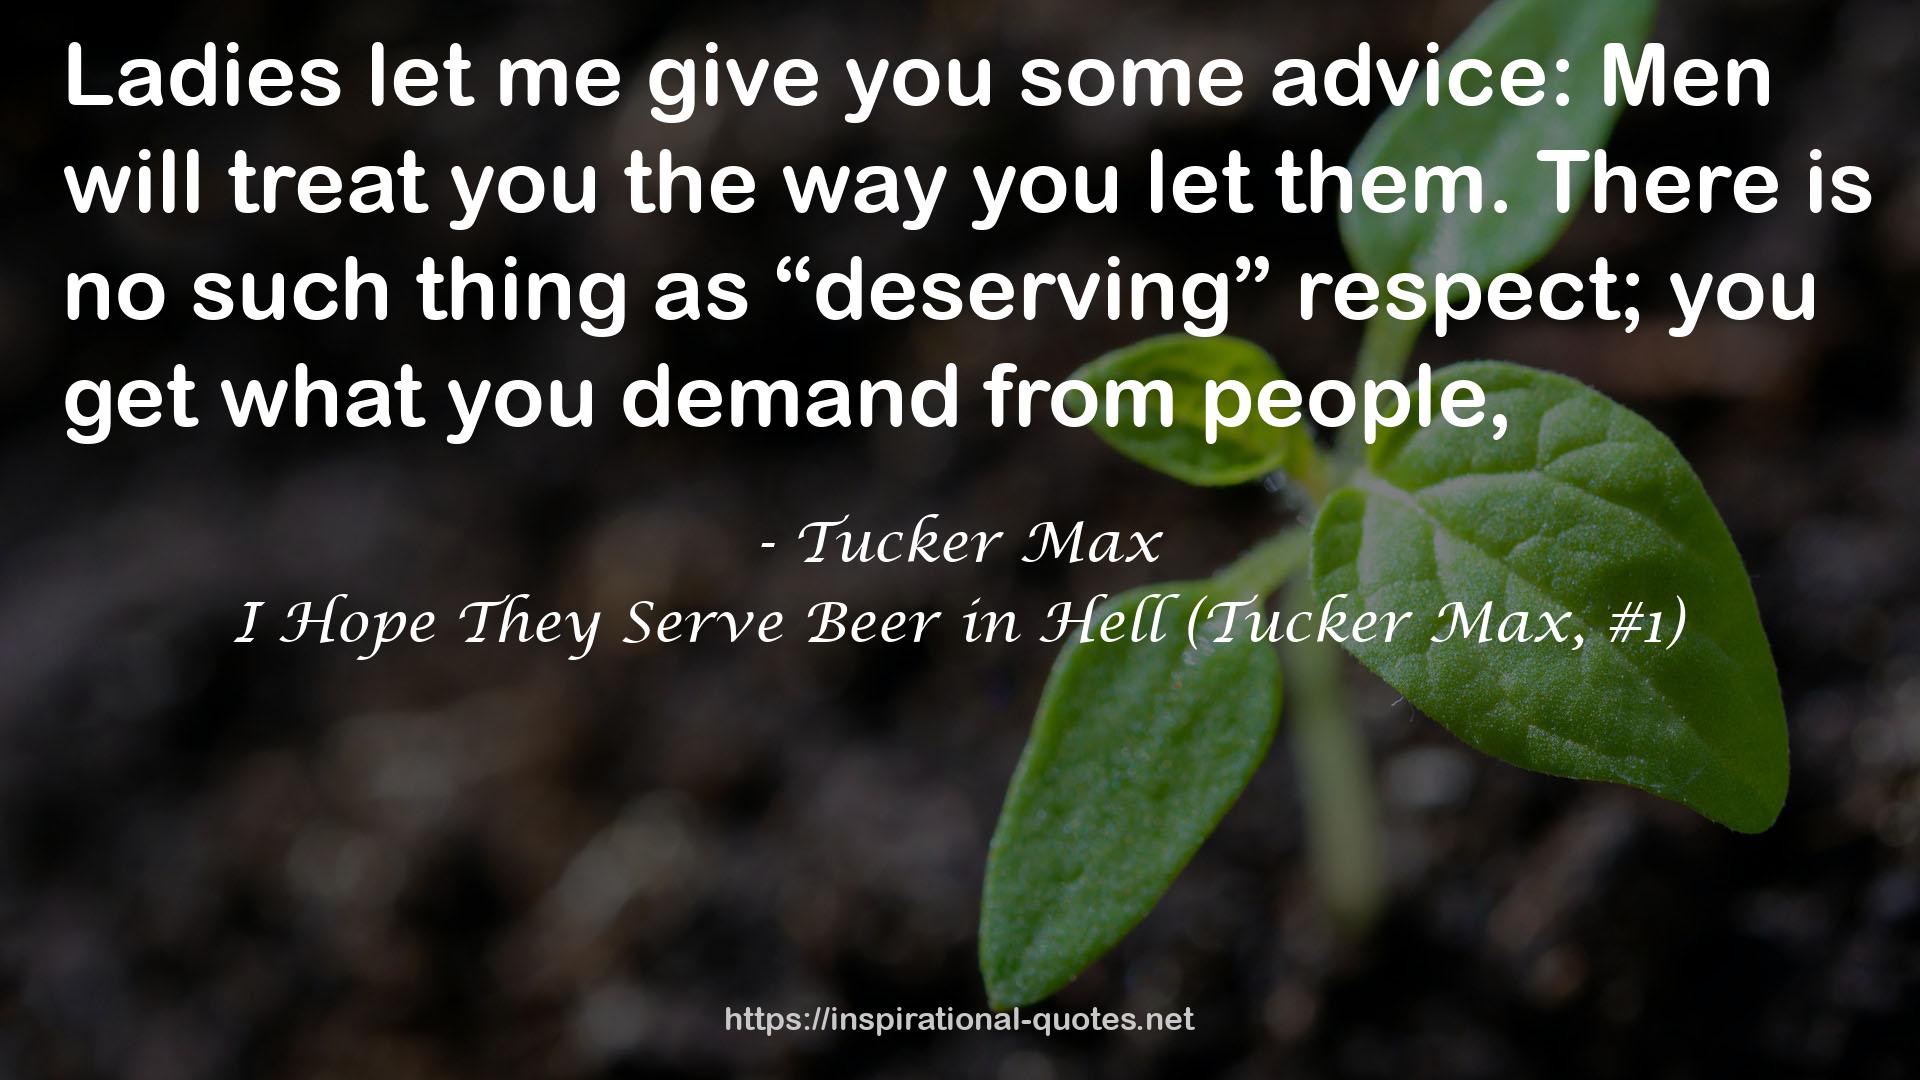 I Hope They Serve Beer in Hell (Tucker Max, #1) QUOTES